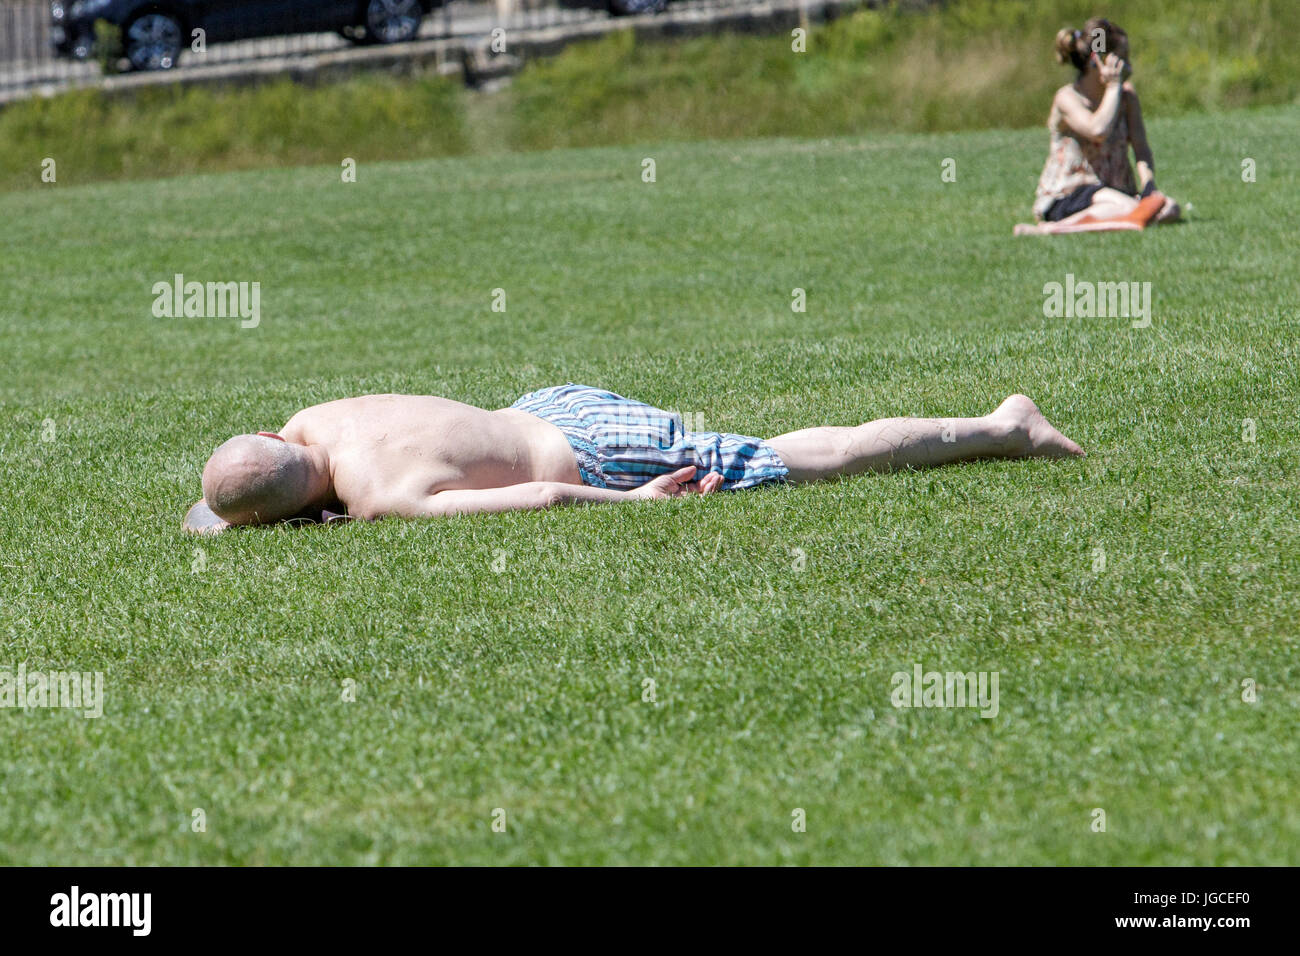 Bath, UK. 5th July, 2017. As the UK enjoys another hot sunny day, a man is pictured enjoying the warm weather in front of the world famous Royal Crescent. Credit: lynchpics/Alamy Live News Stock Photo